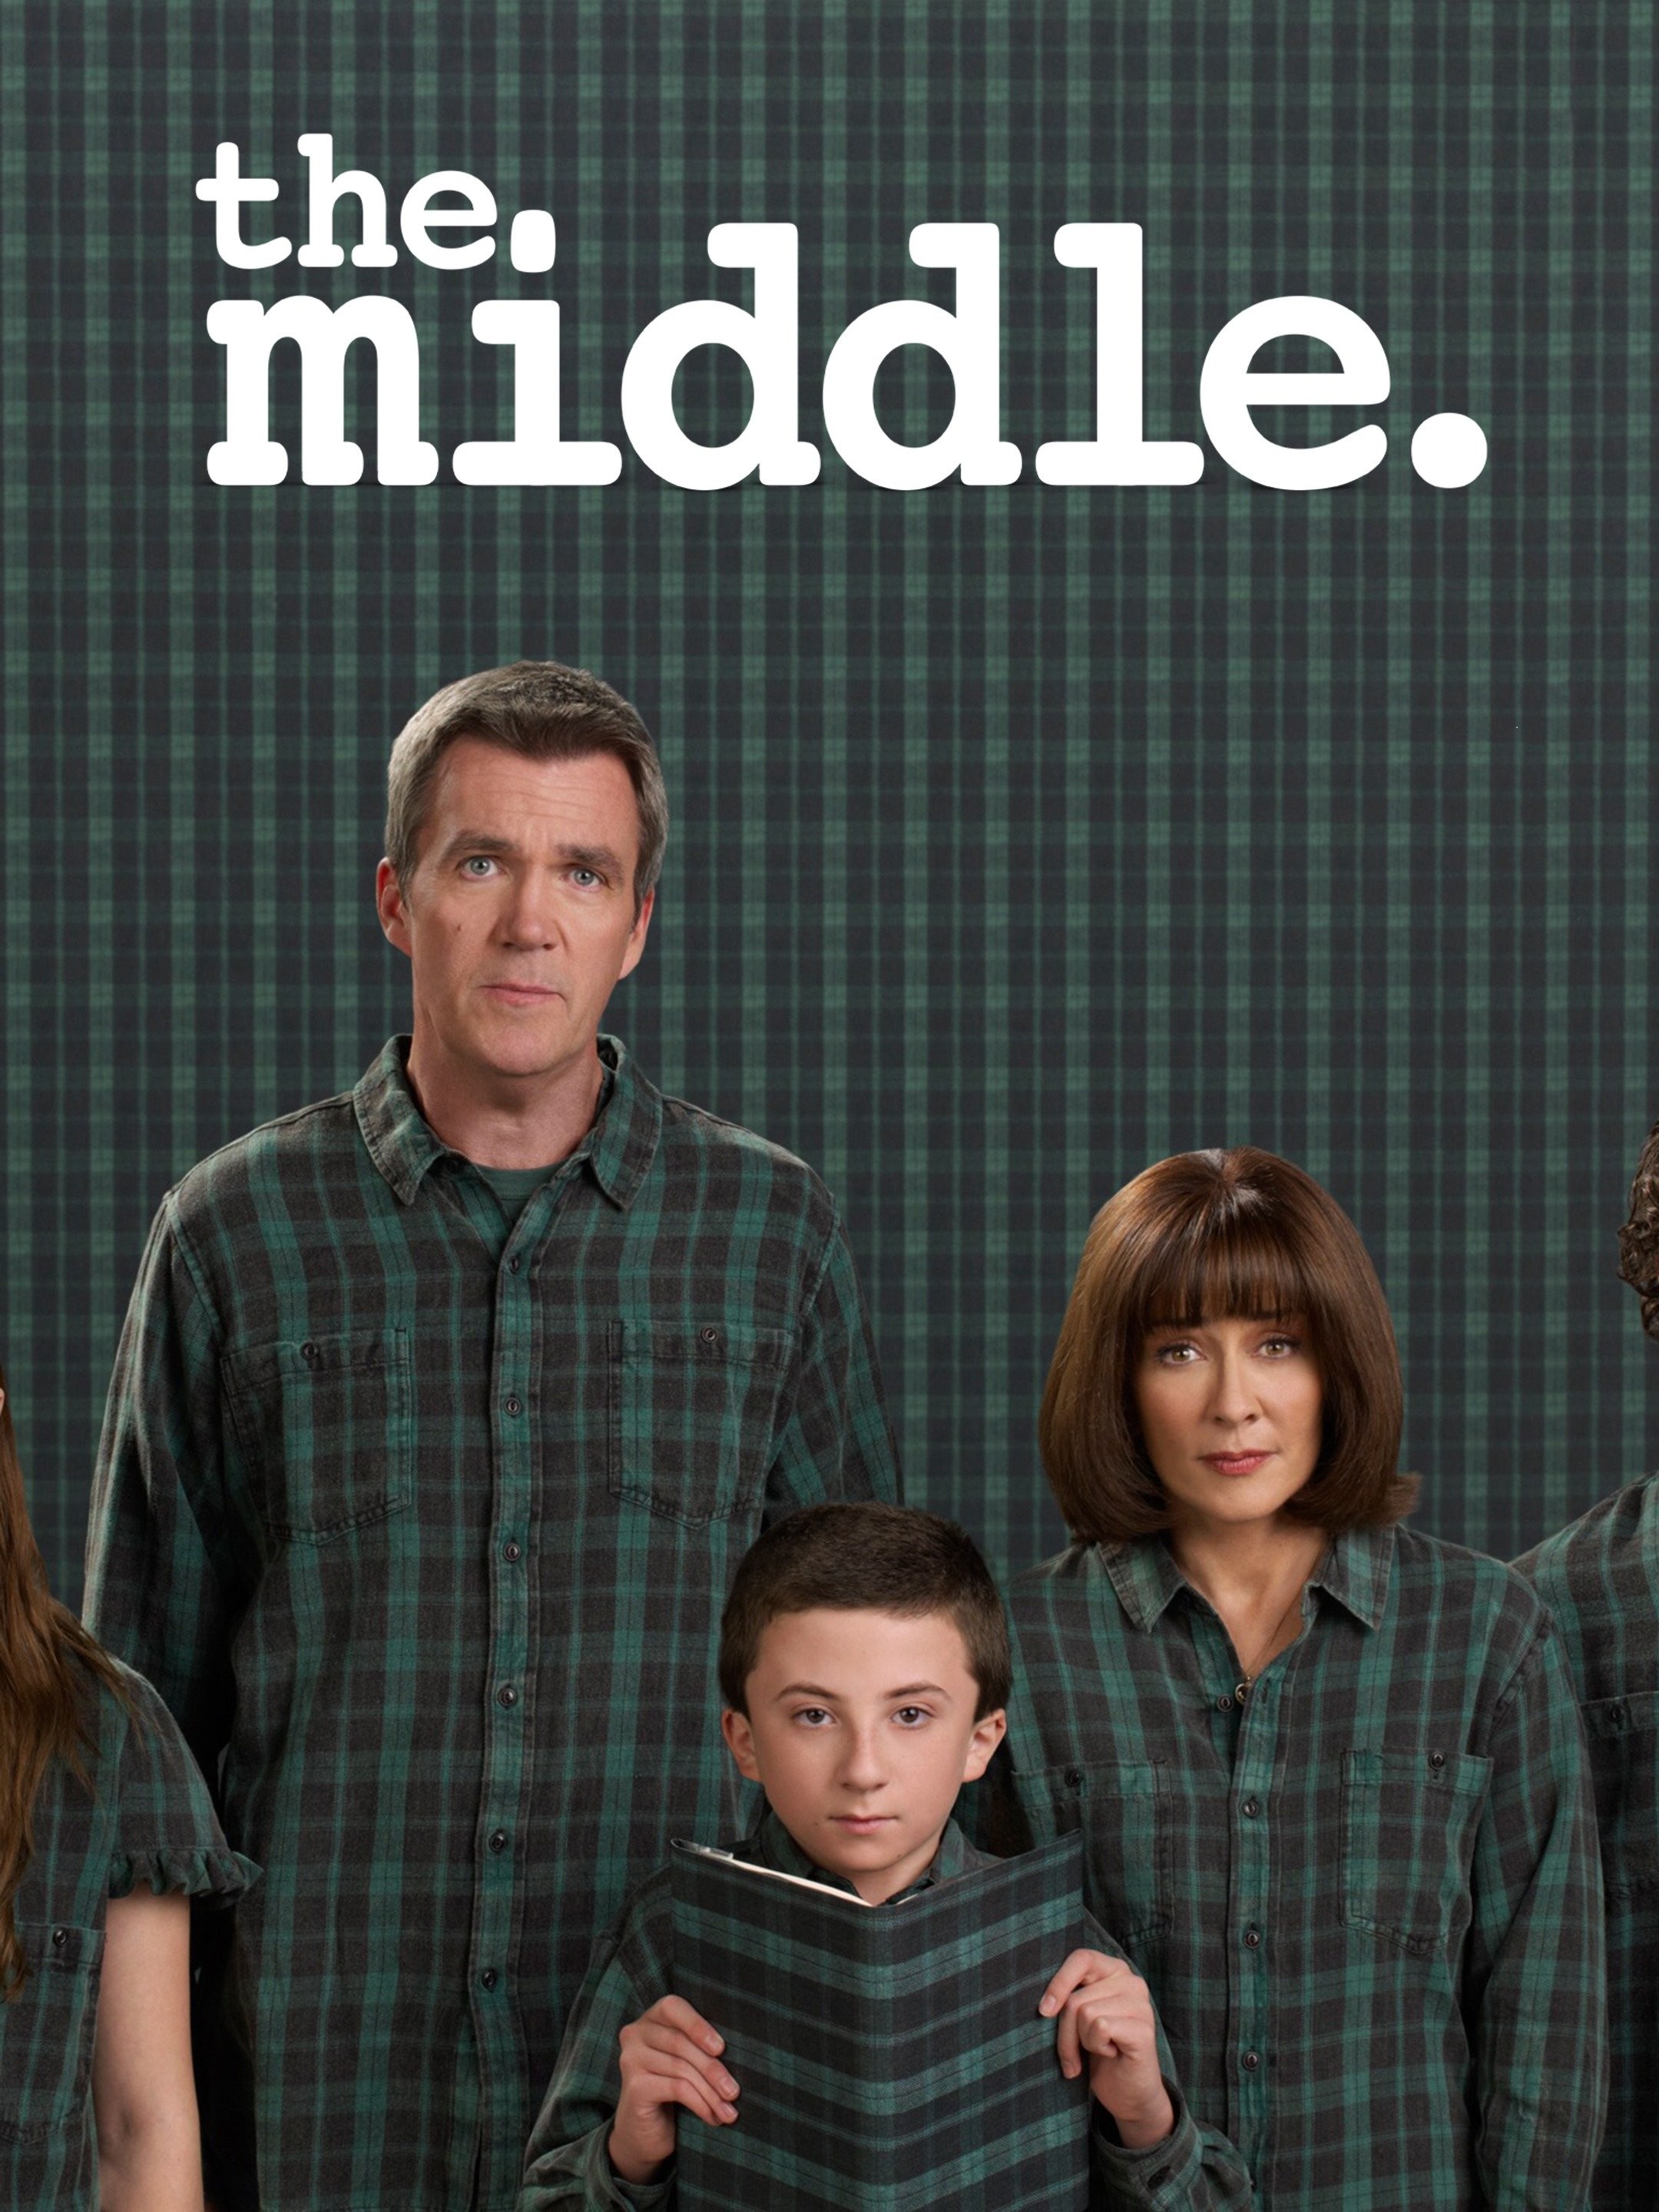 The Middle Season 4 | Rotten Tomatoes